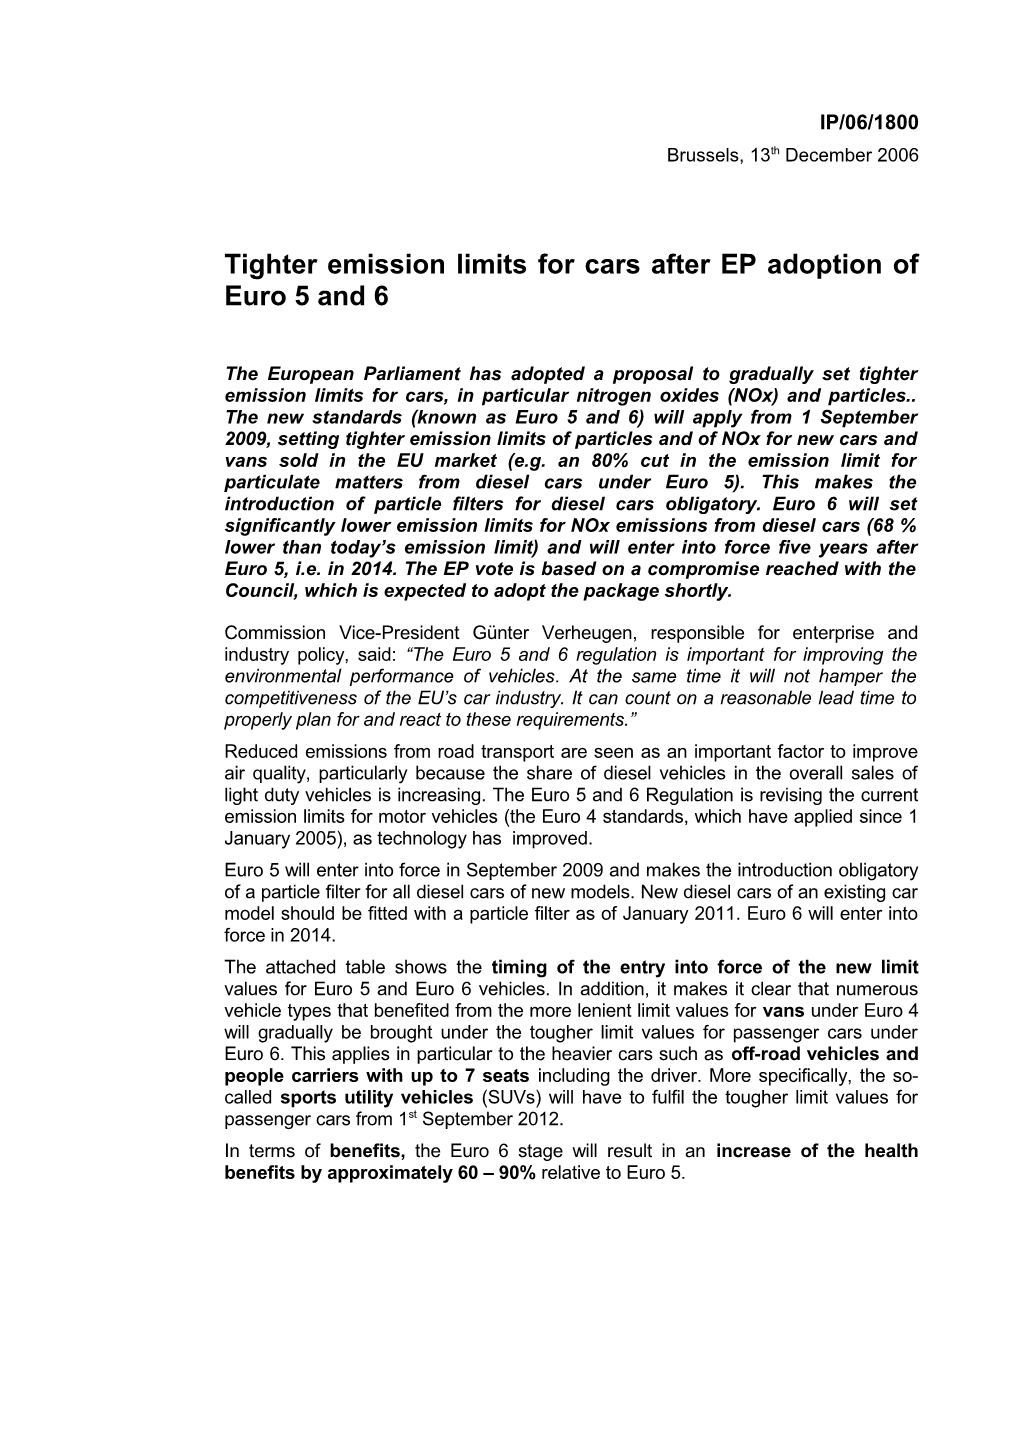 Tighter Emission Limits for Cars After EP Adoption of Euro 5 and 6